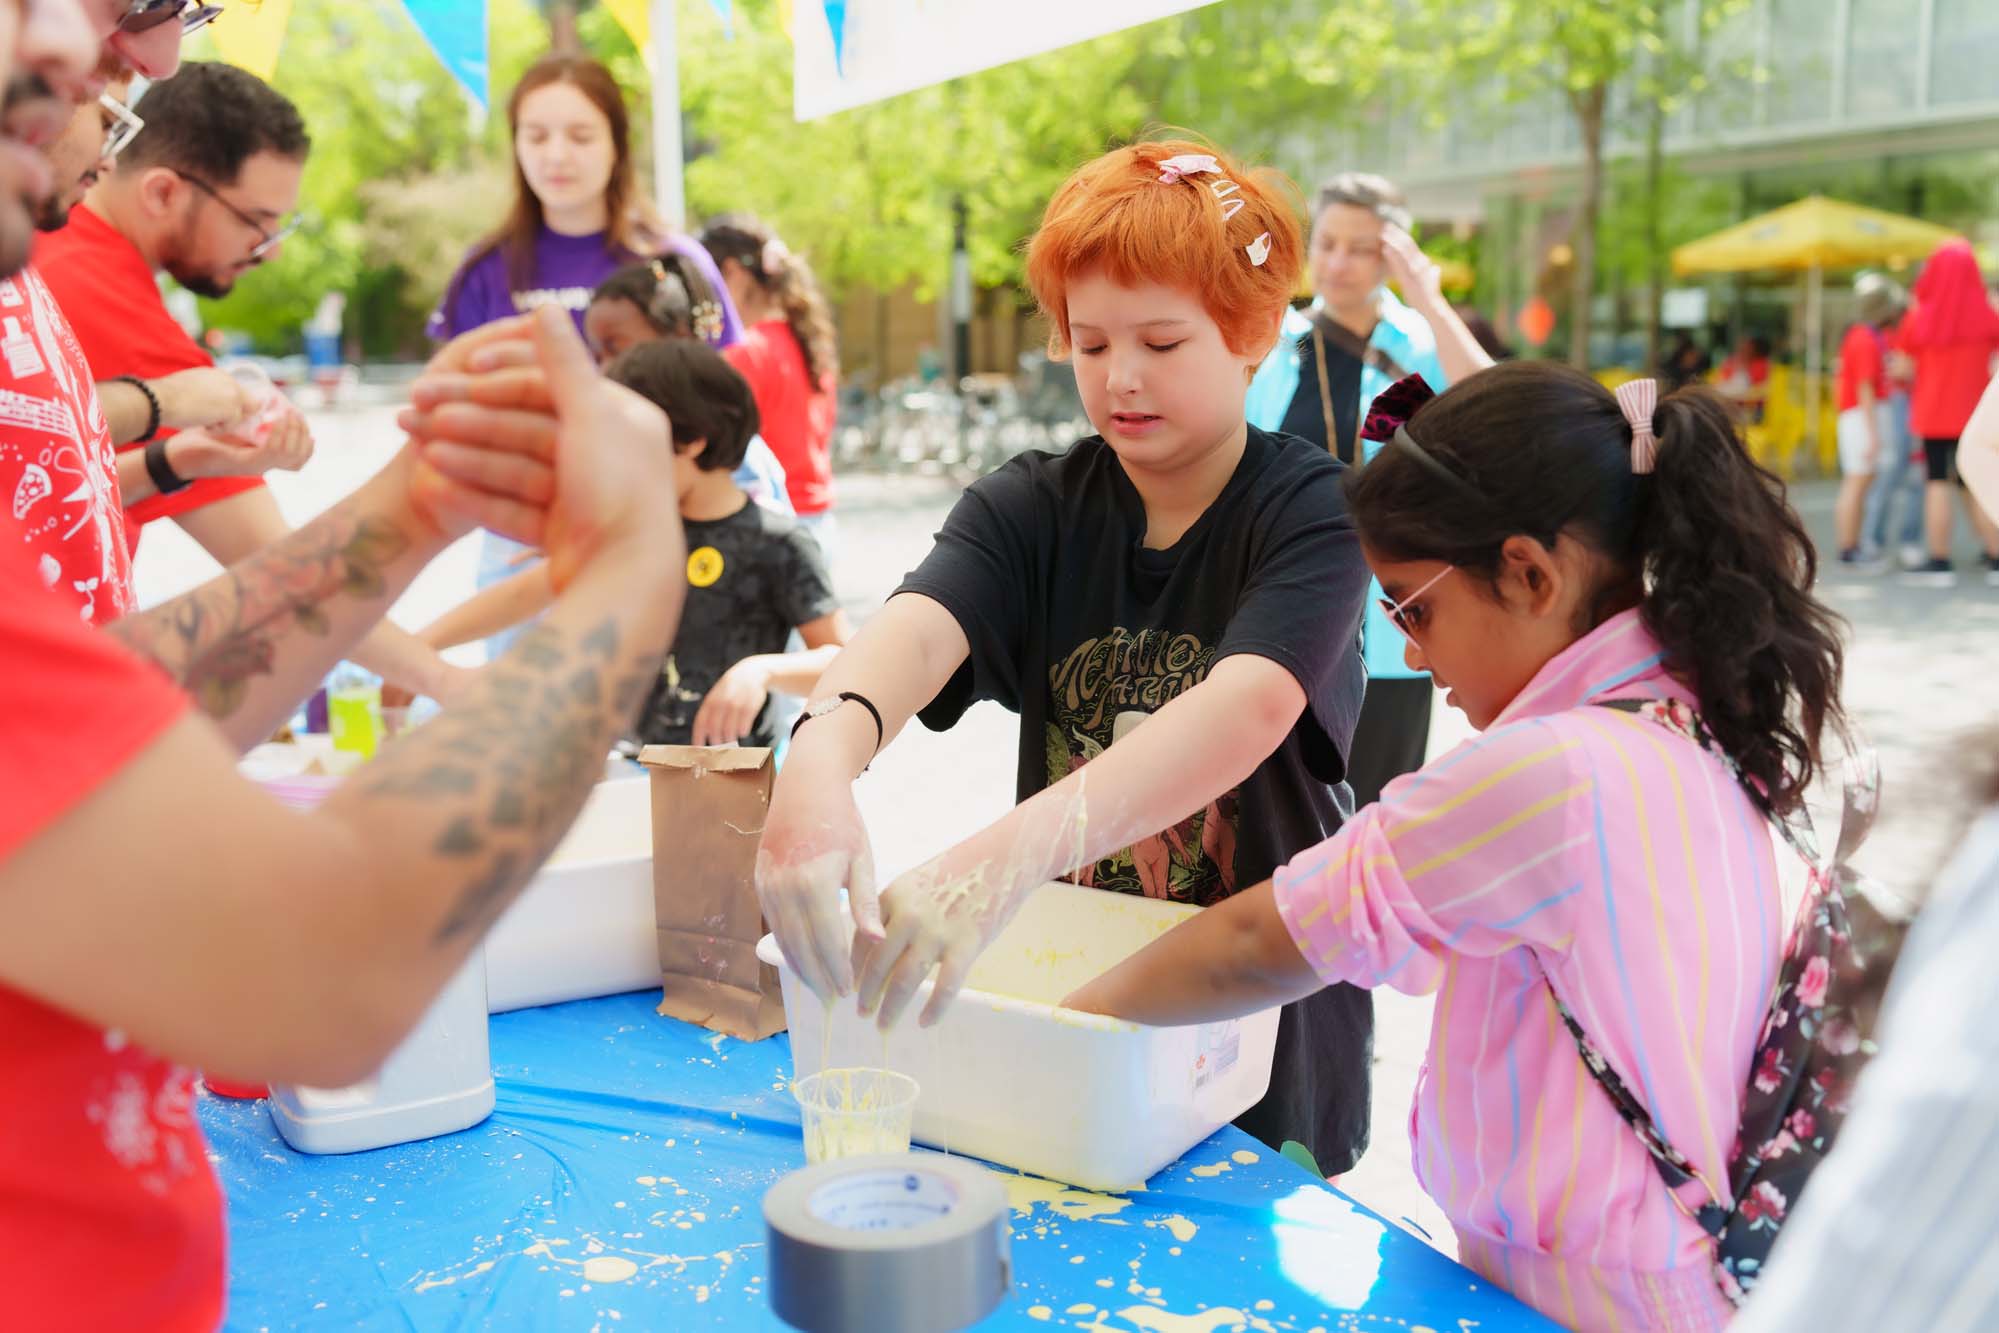 Two children playing with yellow slime with their hands in a white container.